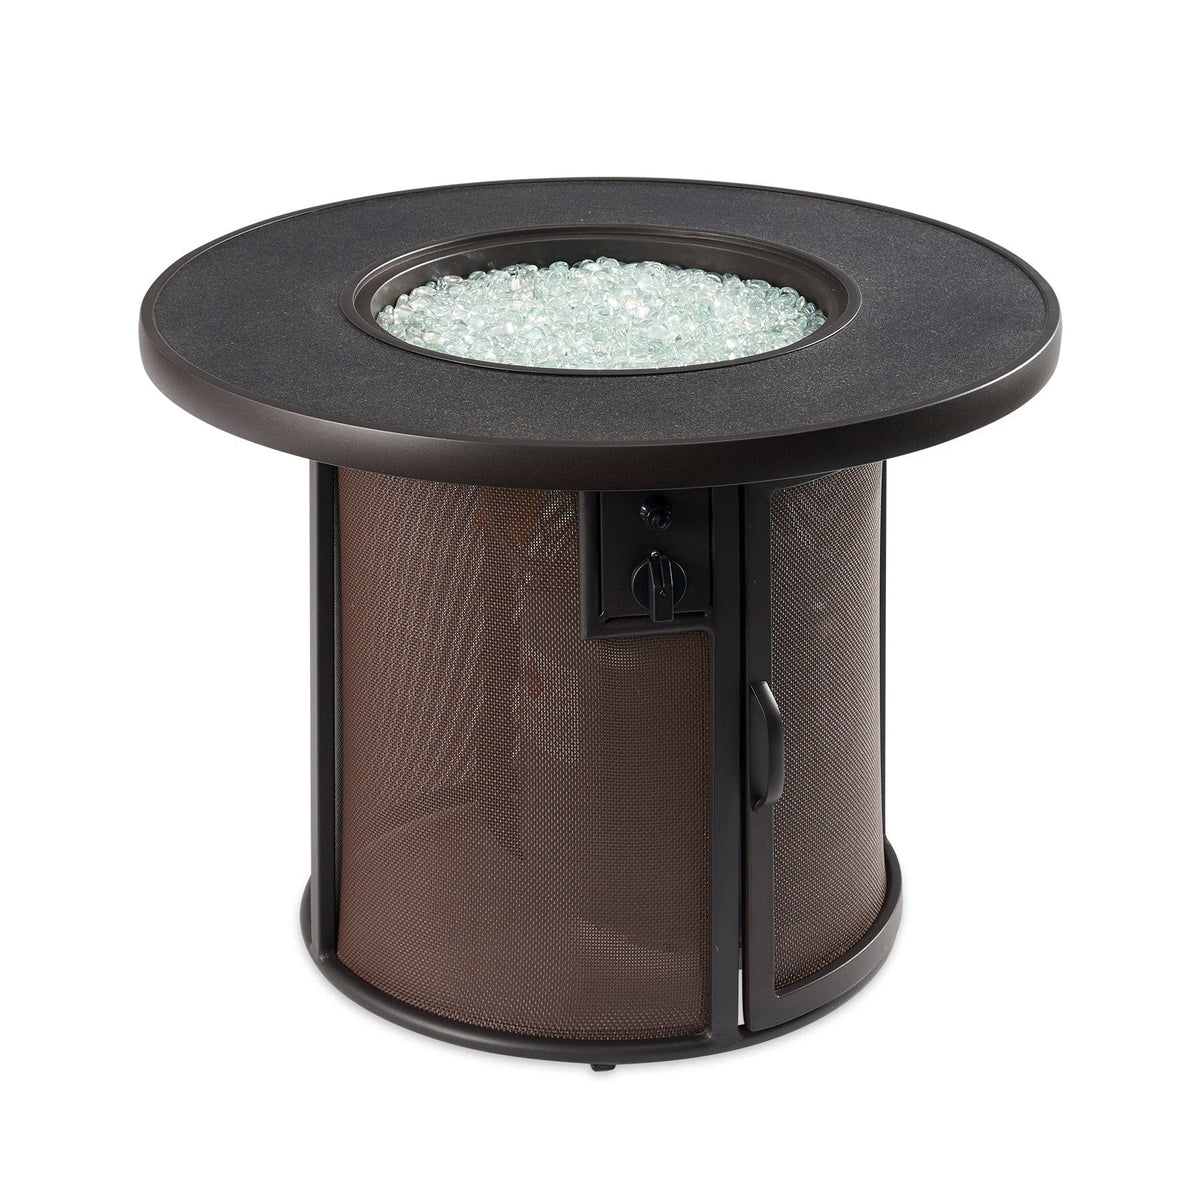 The Outdoor Great Room Fire Features The Outdoor Great Room Brown or Grey Stonefire Round Gas Fire Pit Table / SF-32-K, SF-32-GRY-K